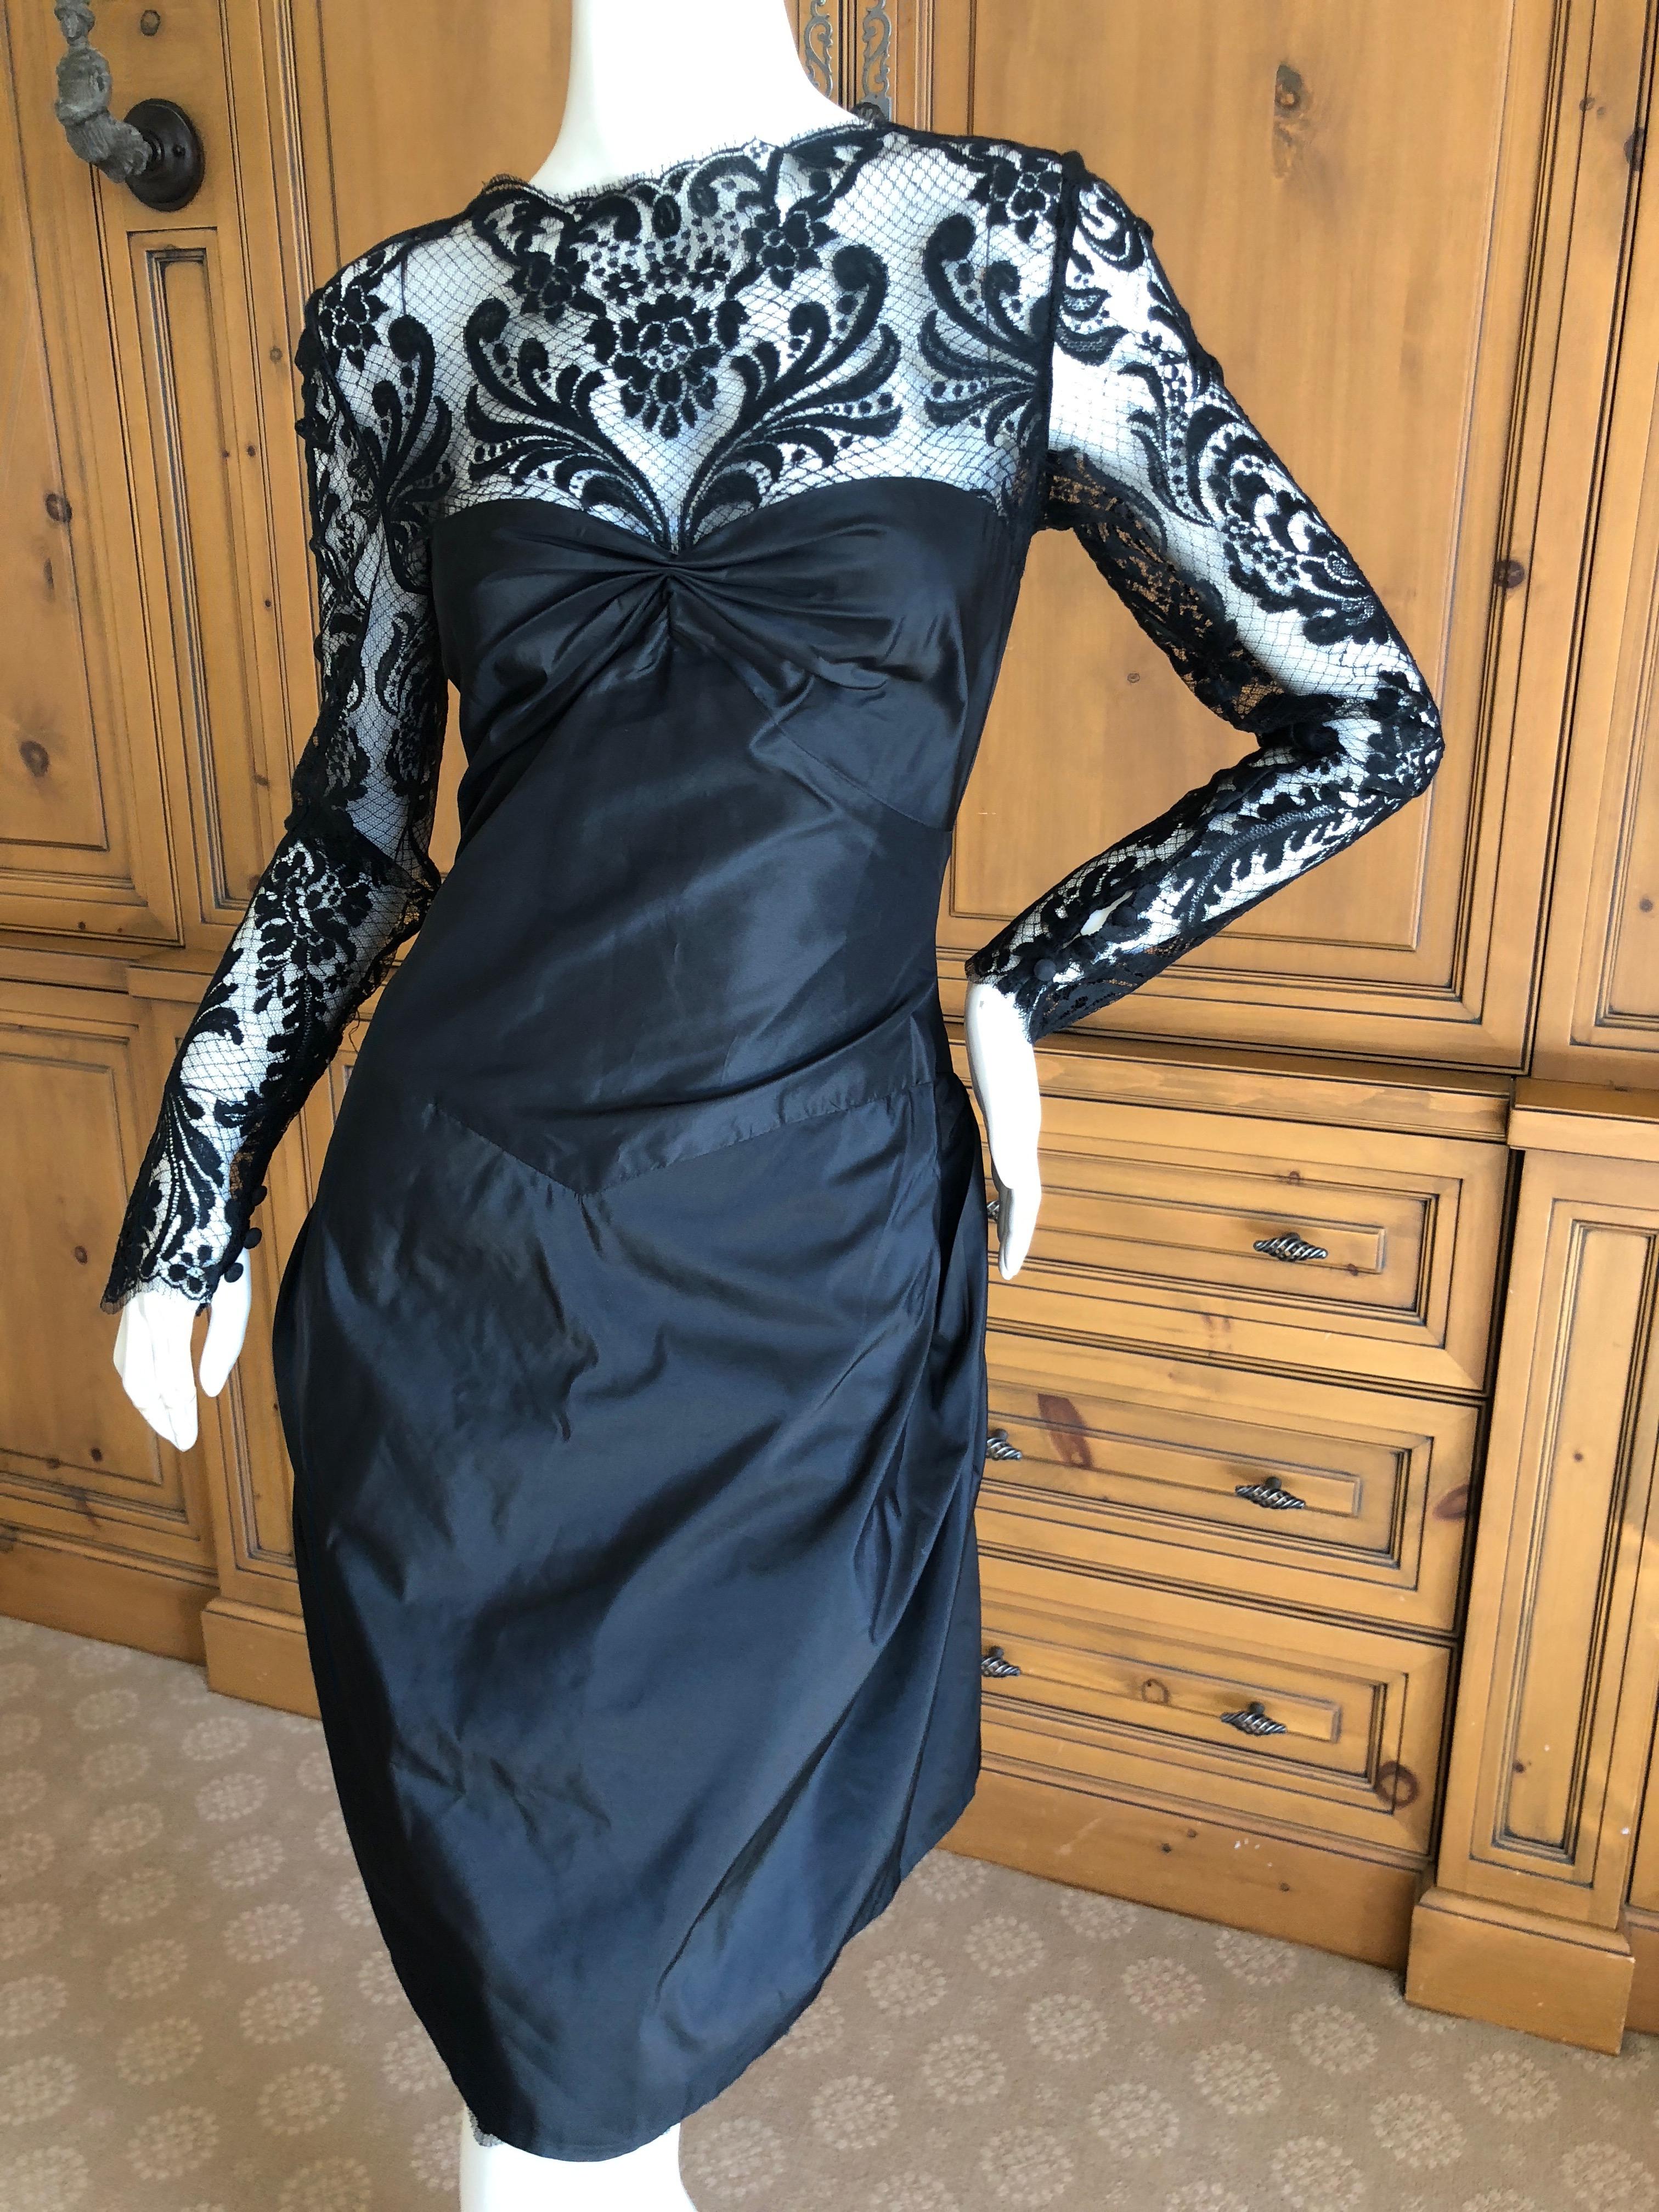 Bill Blass for Saks Fifth Avenue 80's Lace Accented Black Silk Cocktail Dress In Excellent Condition For Sale In Cloverdale, CA